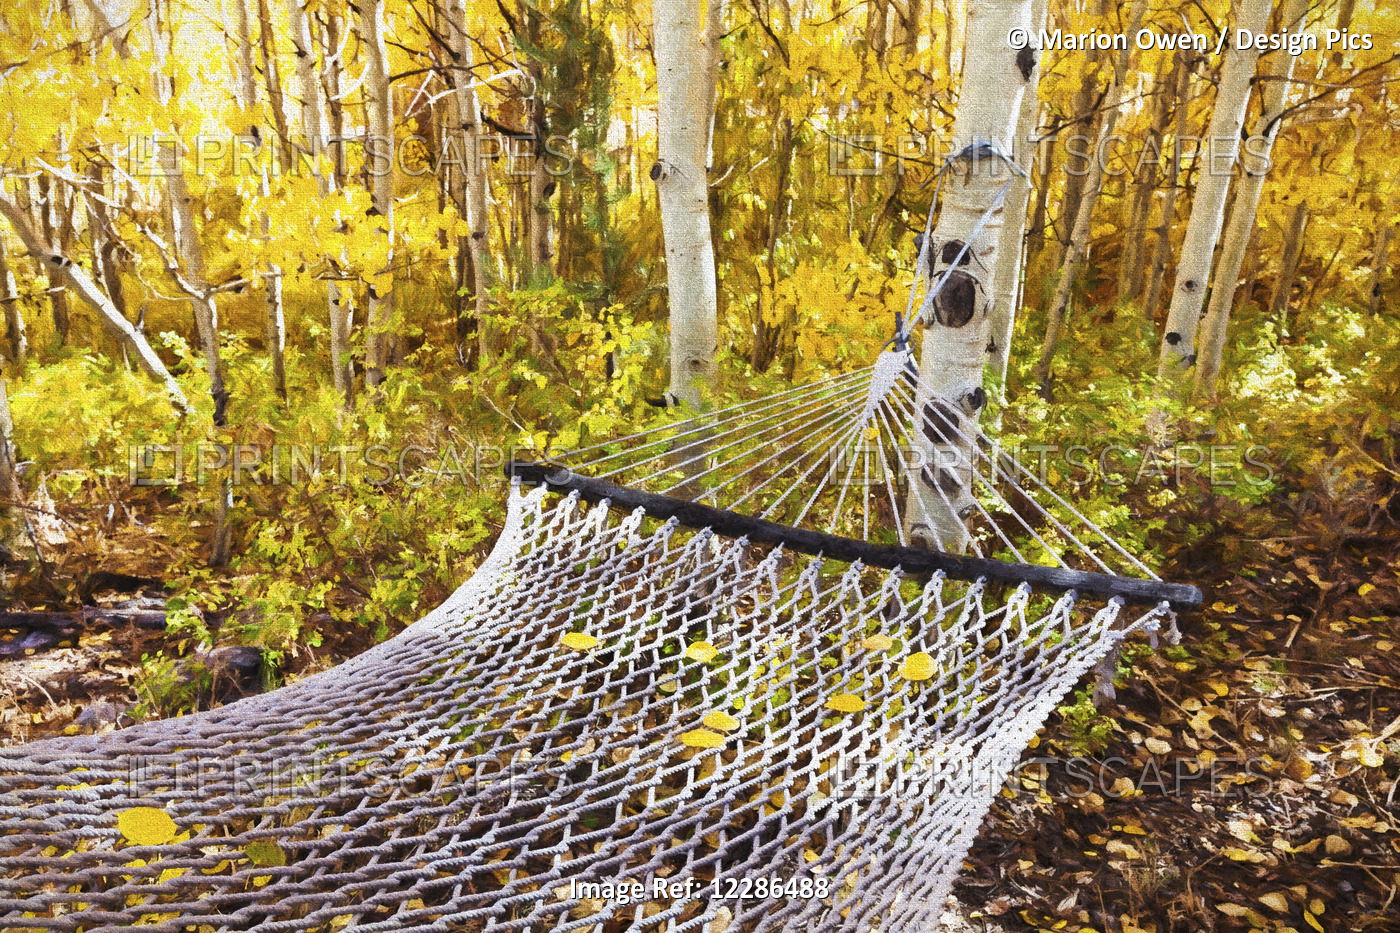 Classic Hammock Invites Visitors To Relax Among Aspen Trees In Bright Autumn ...